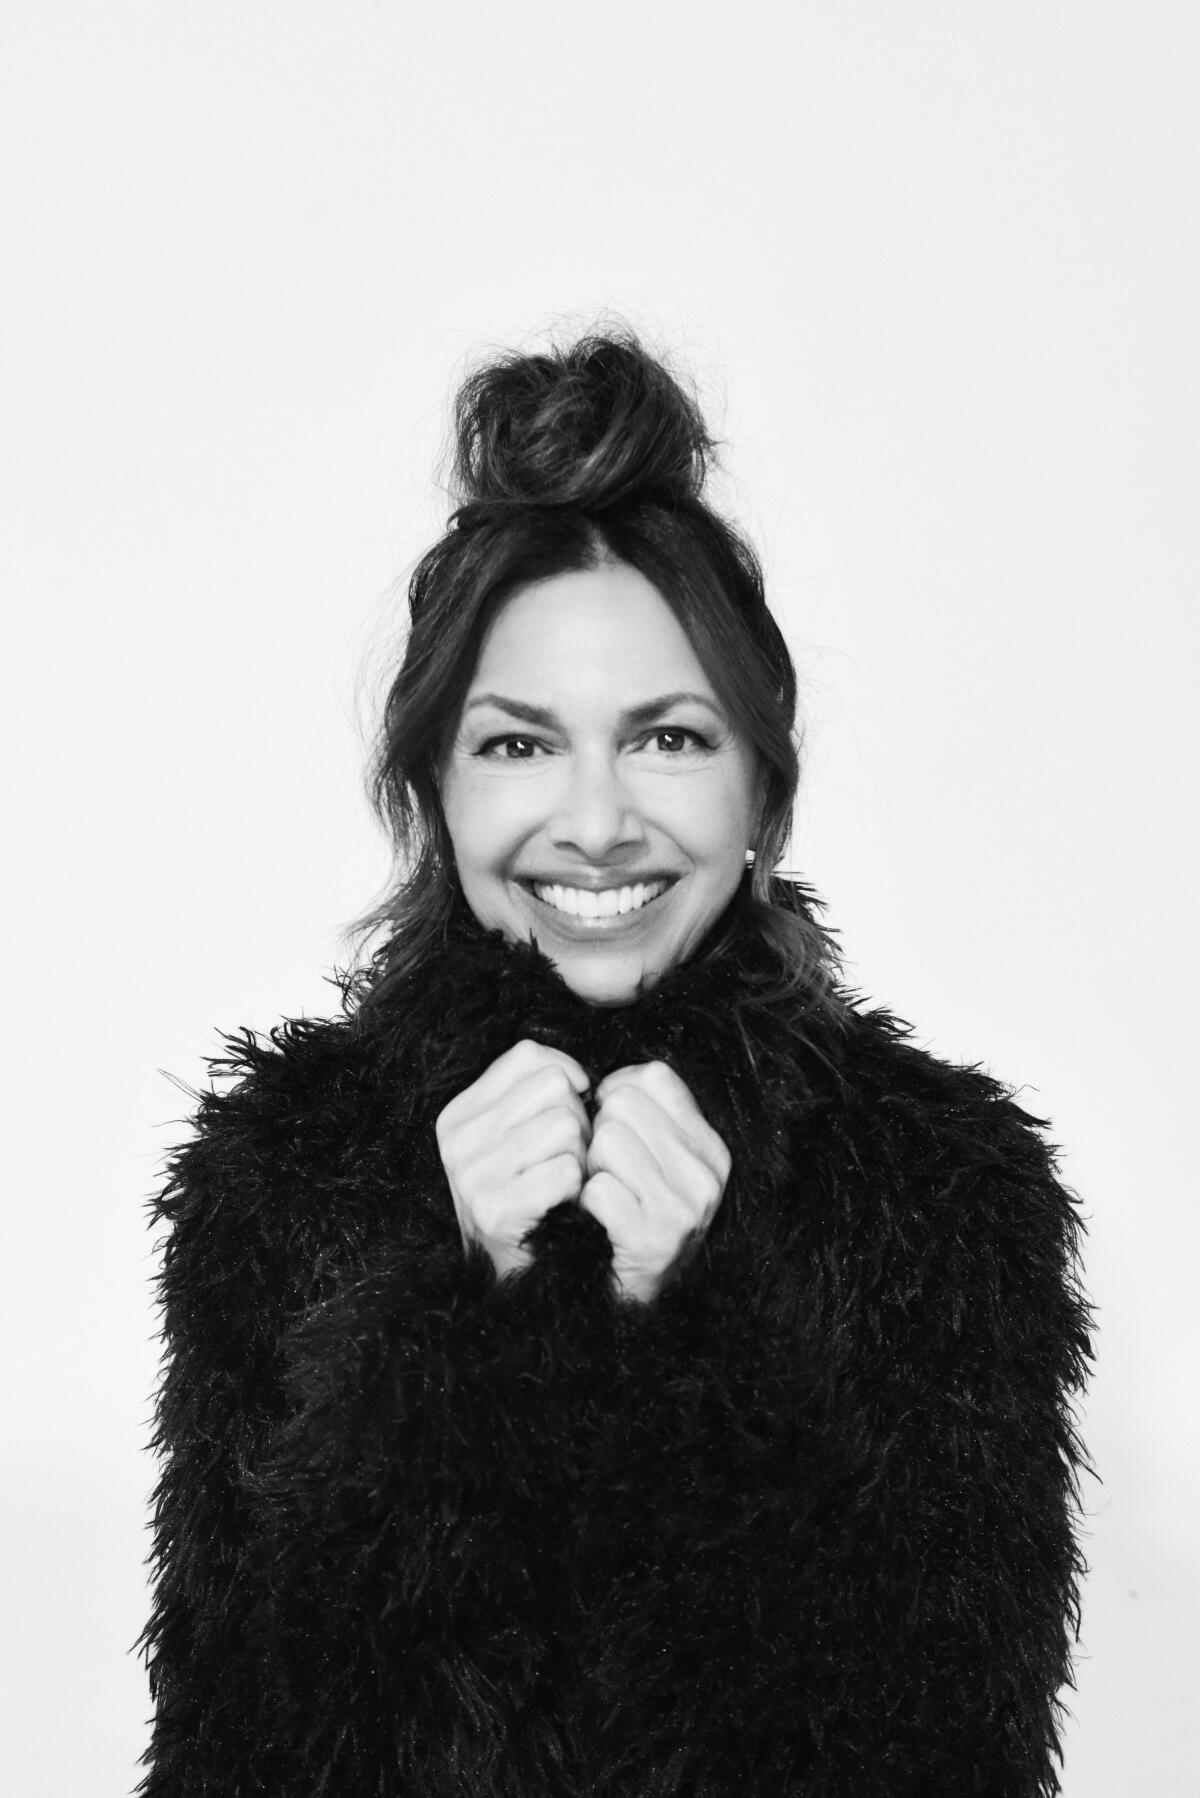 Susanna Hoffs, lead singer of the Bangles, smiles while holding her black furry coat closed.